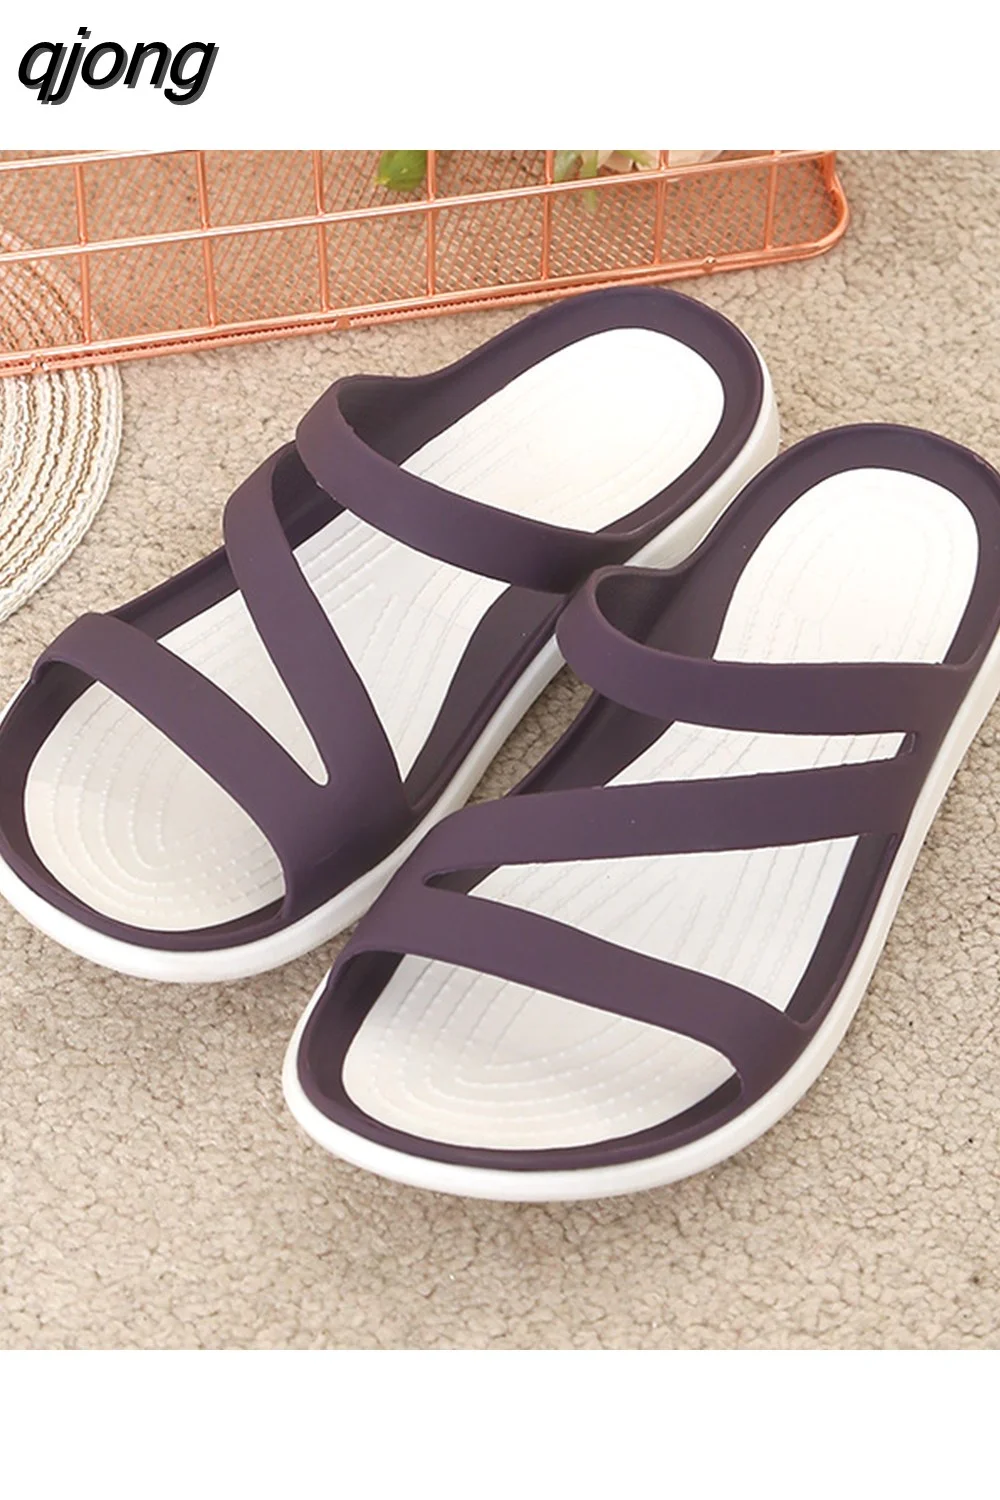 qjong new style flat sandals slippers seaside waterproof beach shoes casual and comfortable flatheeled women's slippers sandals